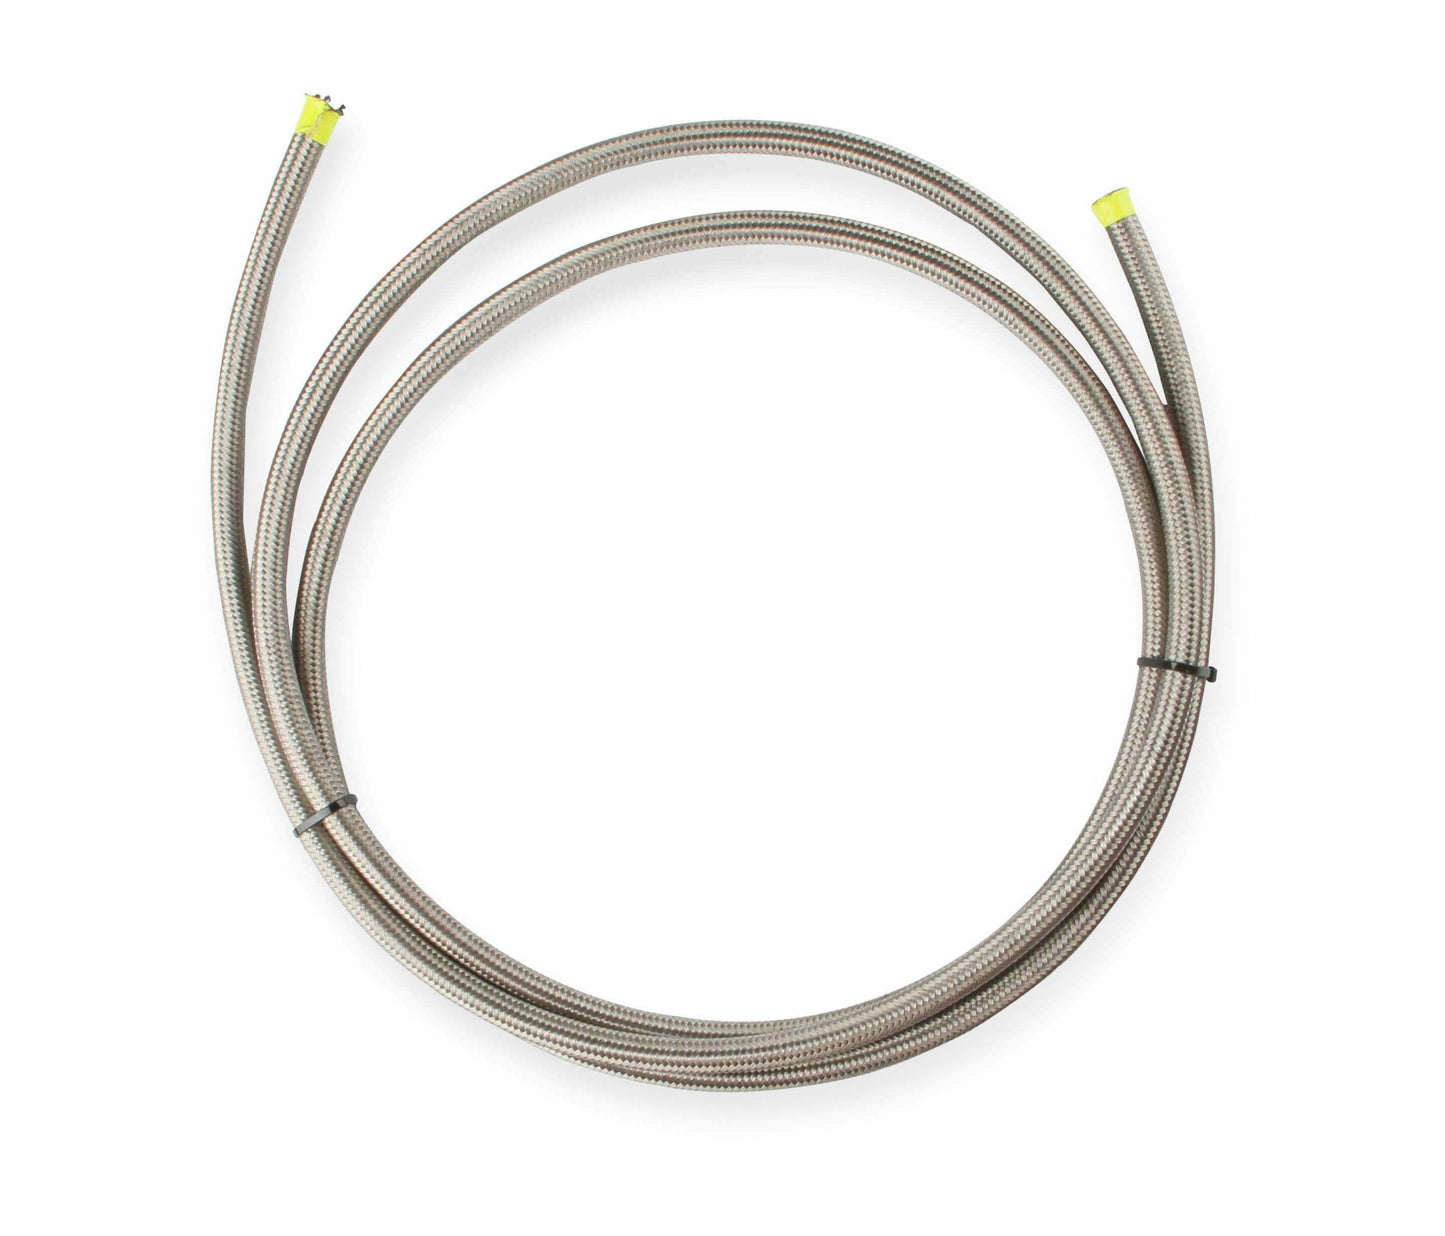 Earls Auto-Flex Hose- Size6 -Sold per Foot Continuous Length upto 50'- 300006ERL